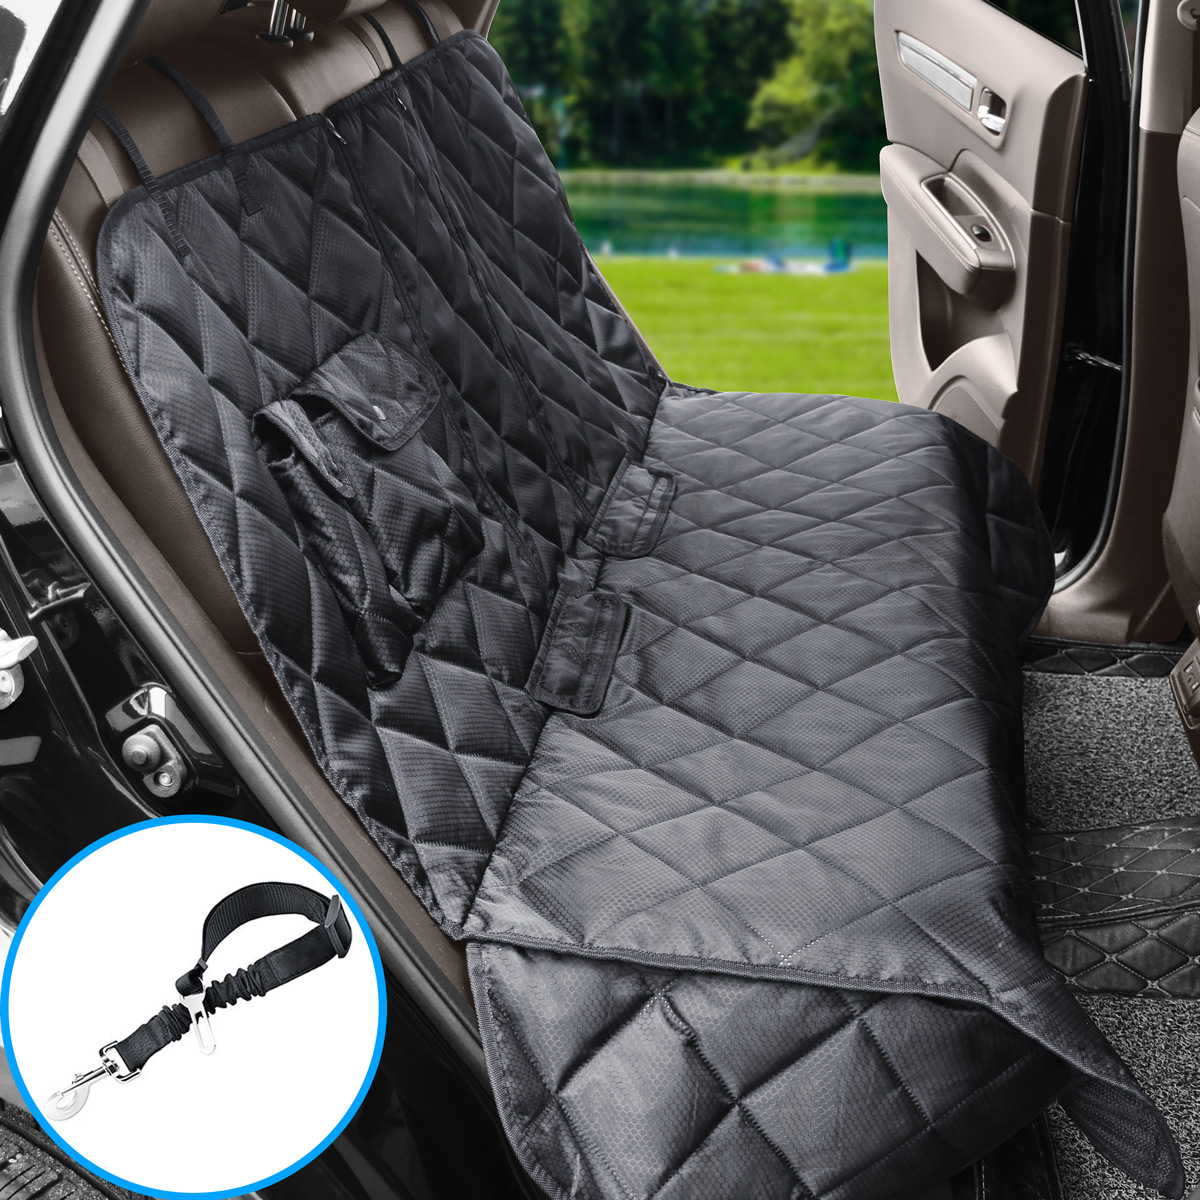 Dog Seat Covers 100% Waterproof Pet Car Seat Cover Nonslip Bench Seat Covers Armrest Compatible for Back Seat with Pet Seat Belts for Cars Trucks & SUVs